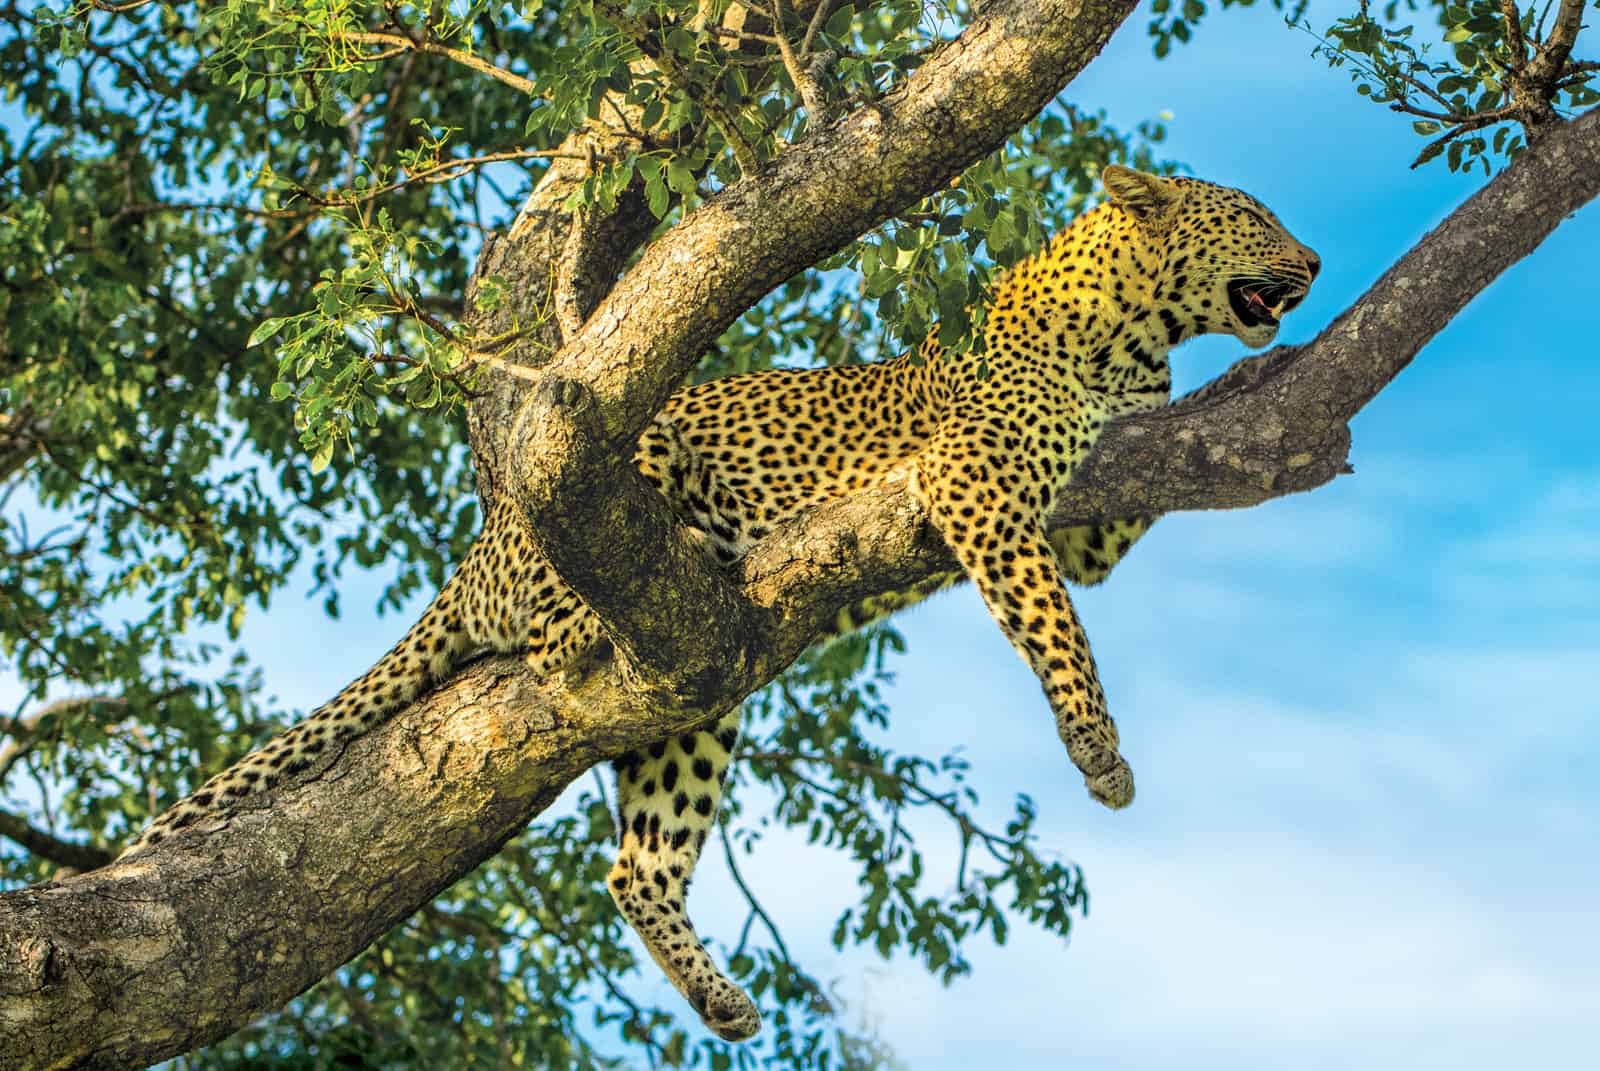 Leaping leopards